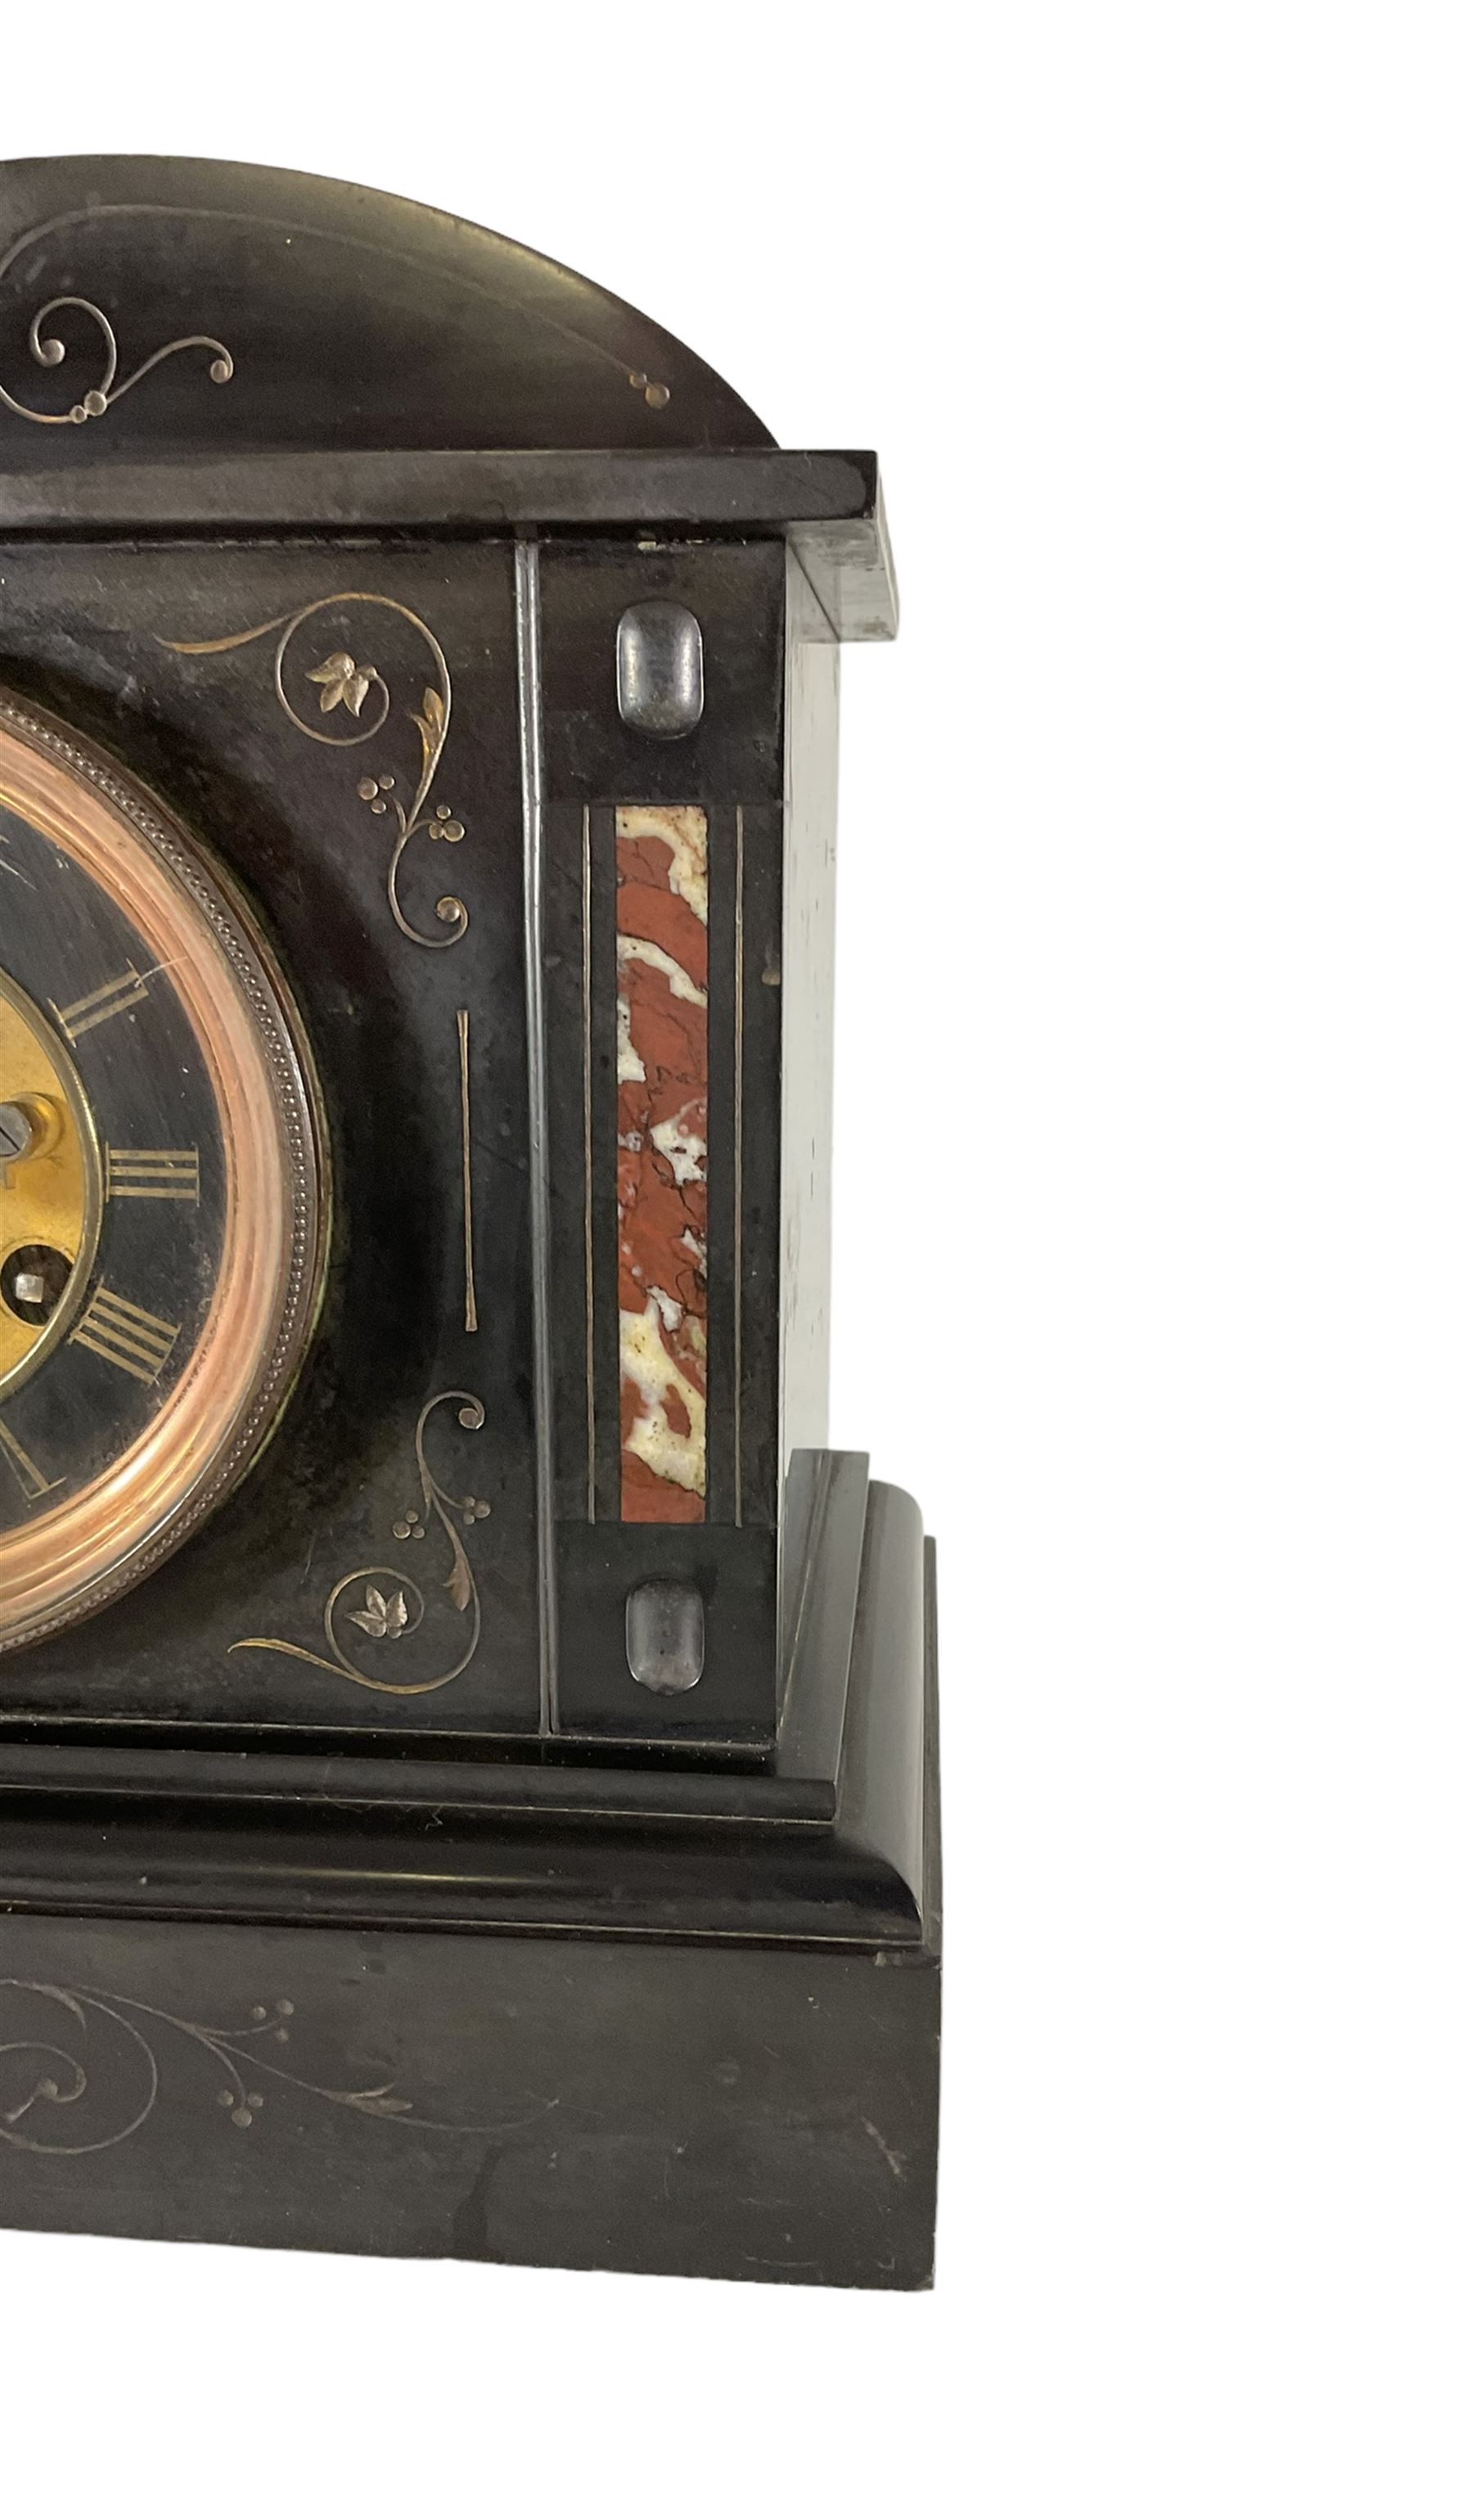 French - 19th century Belgium slate and marble 8-day mantle clock - Image 3 of 4